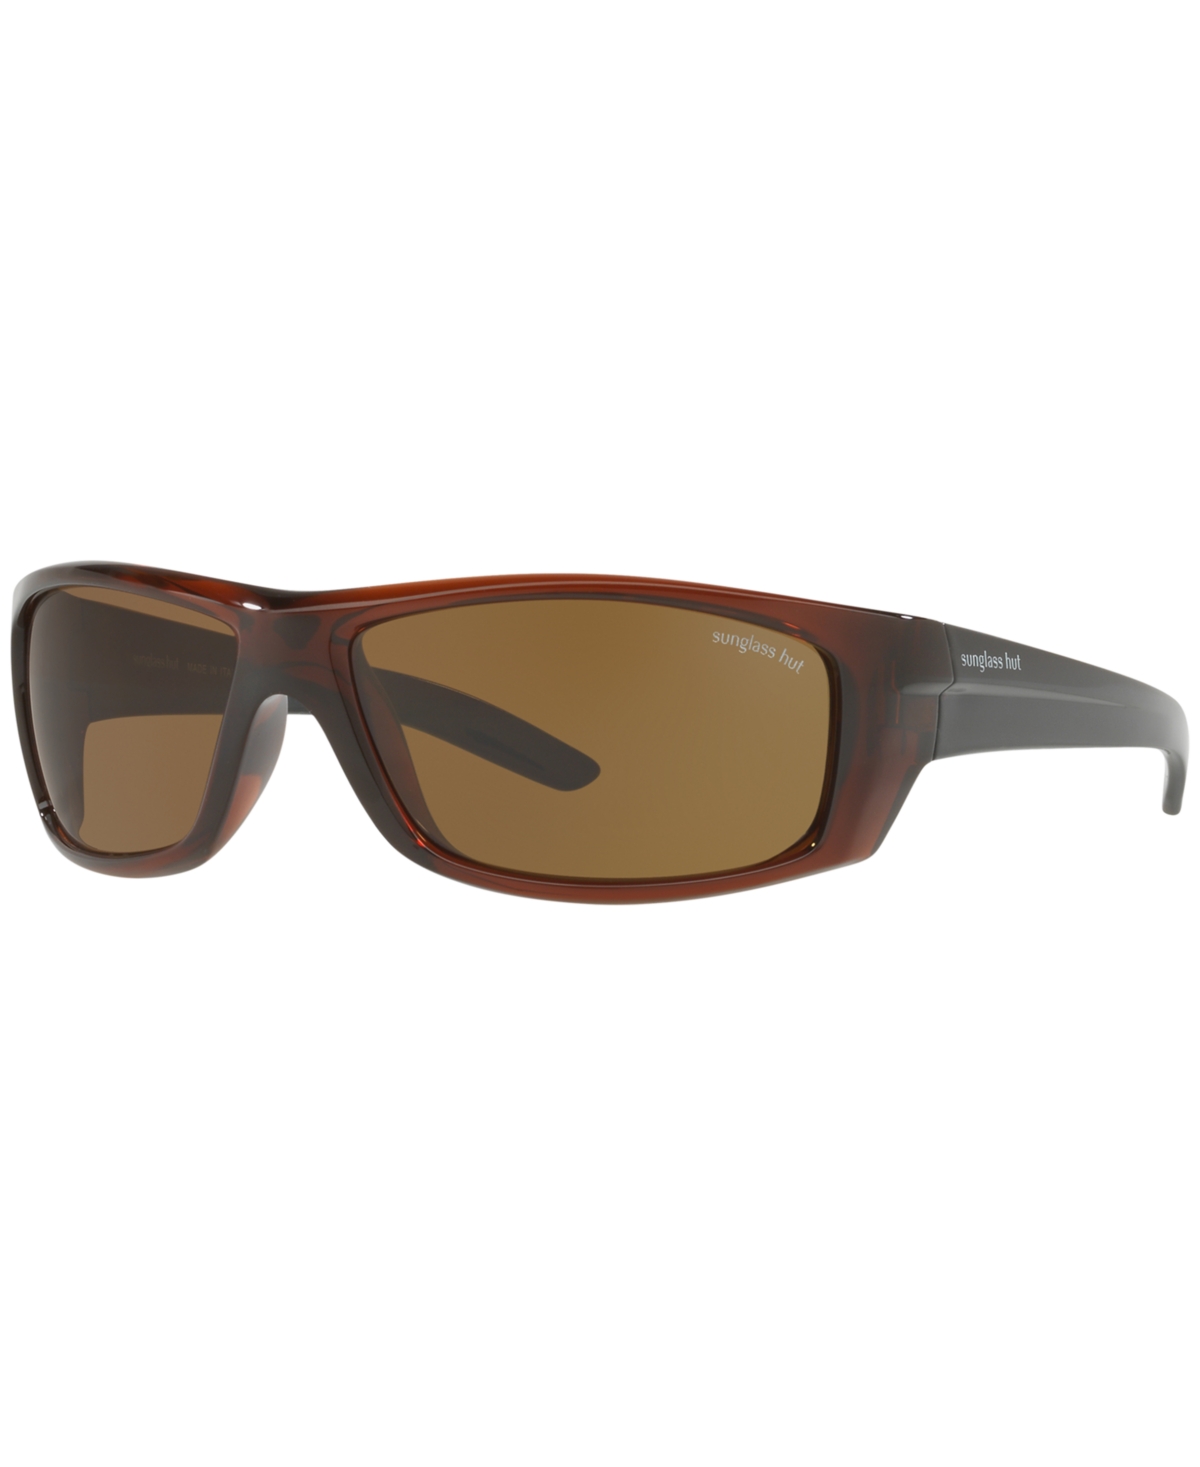 Sunglass Hut Collection Sunglasses, Hu2007 63 In Brown,brown